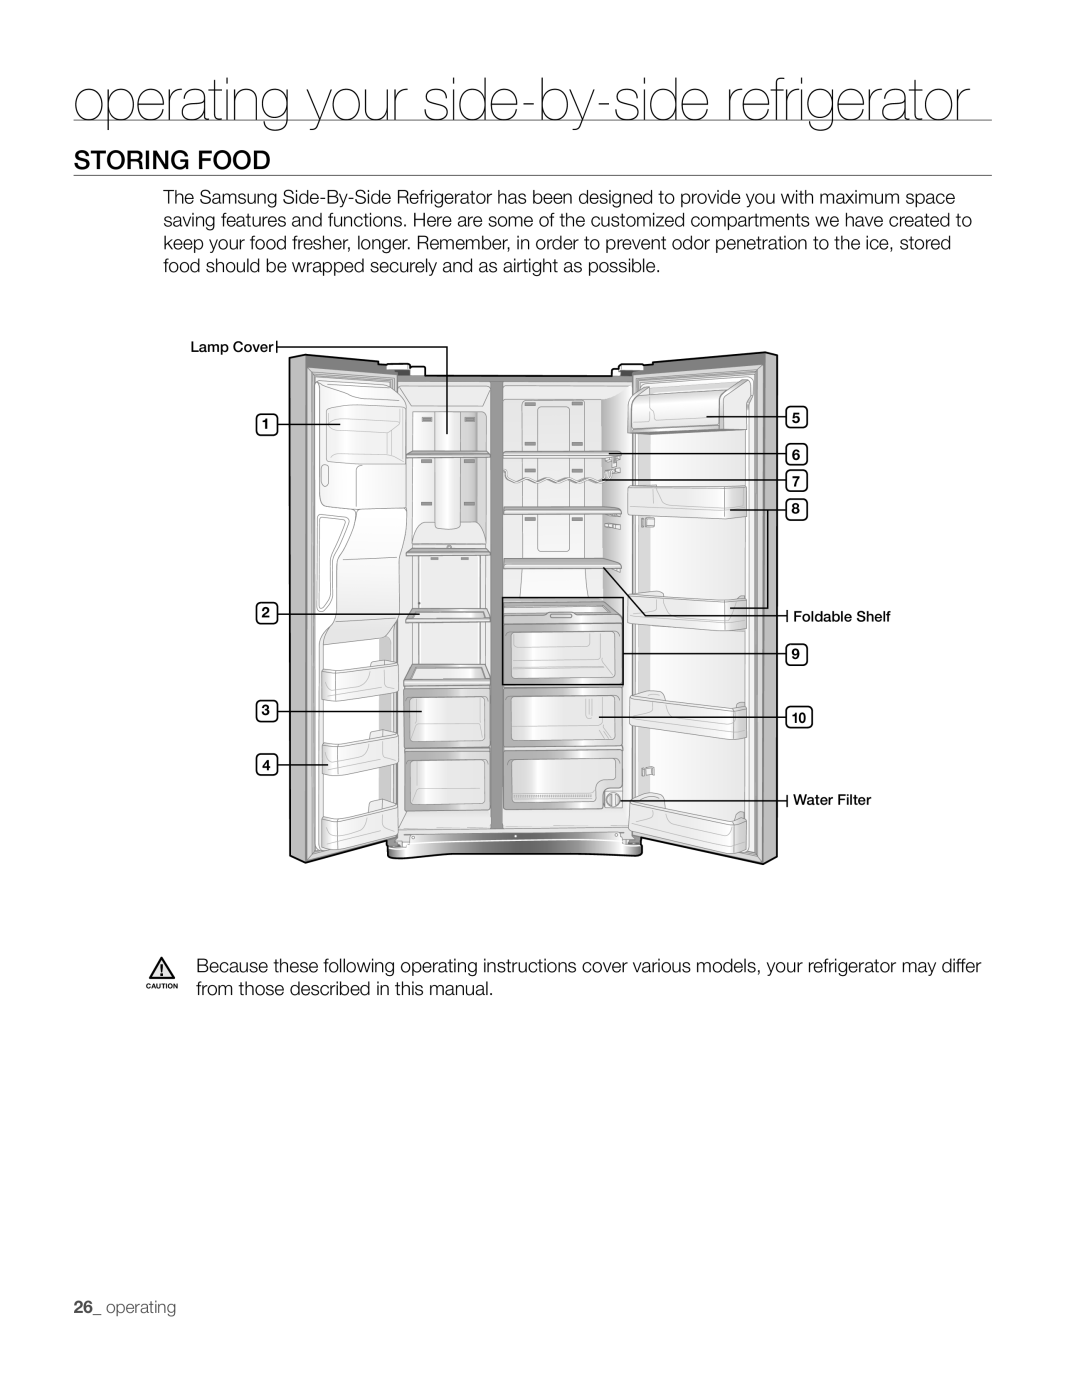 Samsung RS265TD, RS267TD user manual Storing food, operating your side-by-side refrigerator 